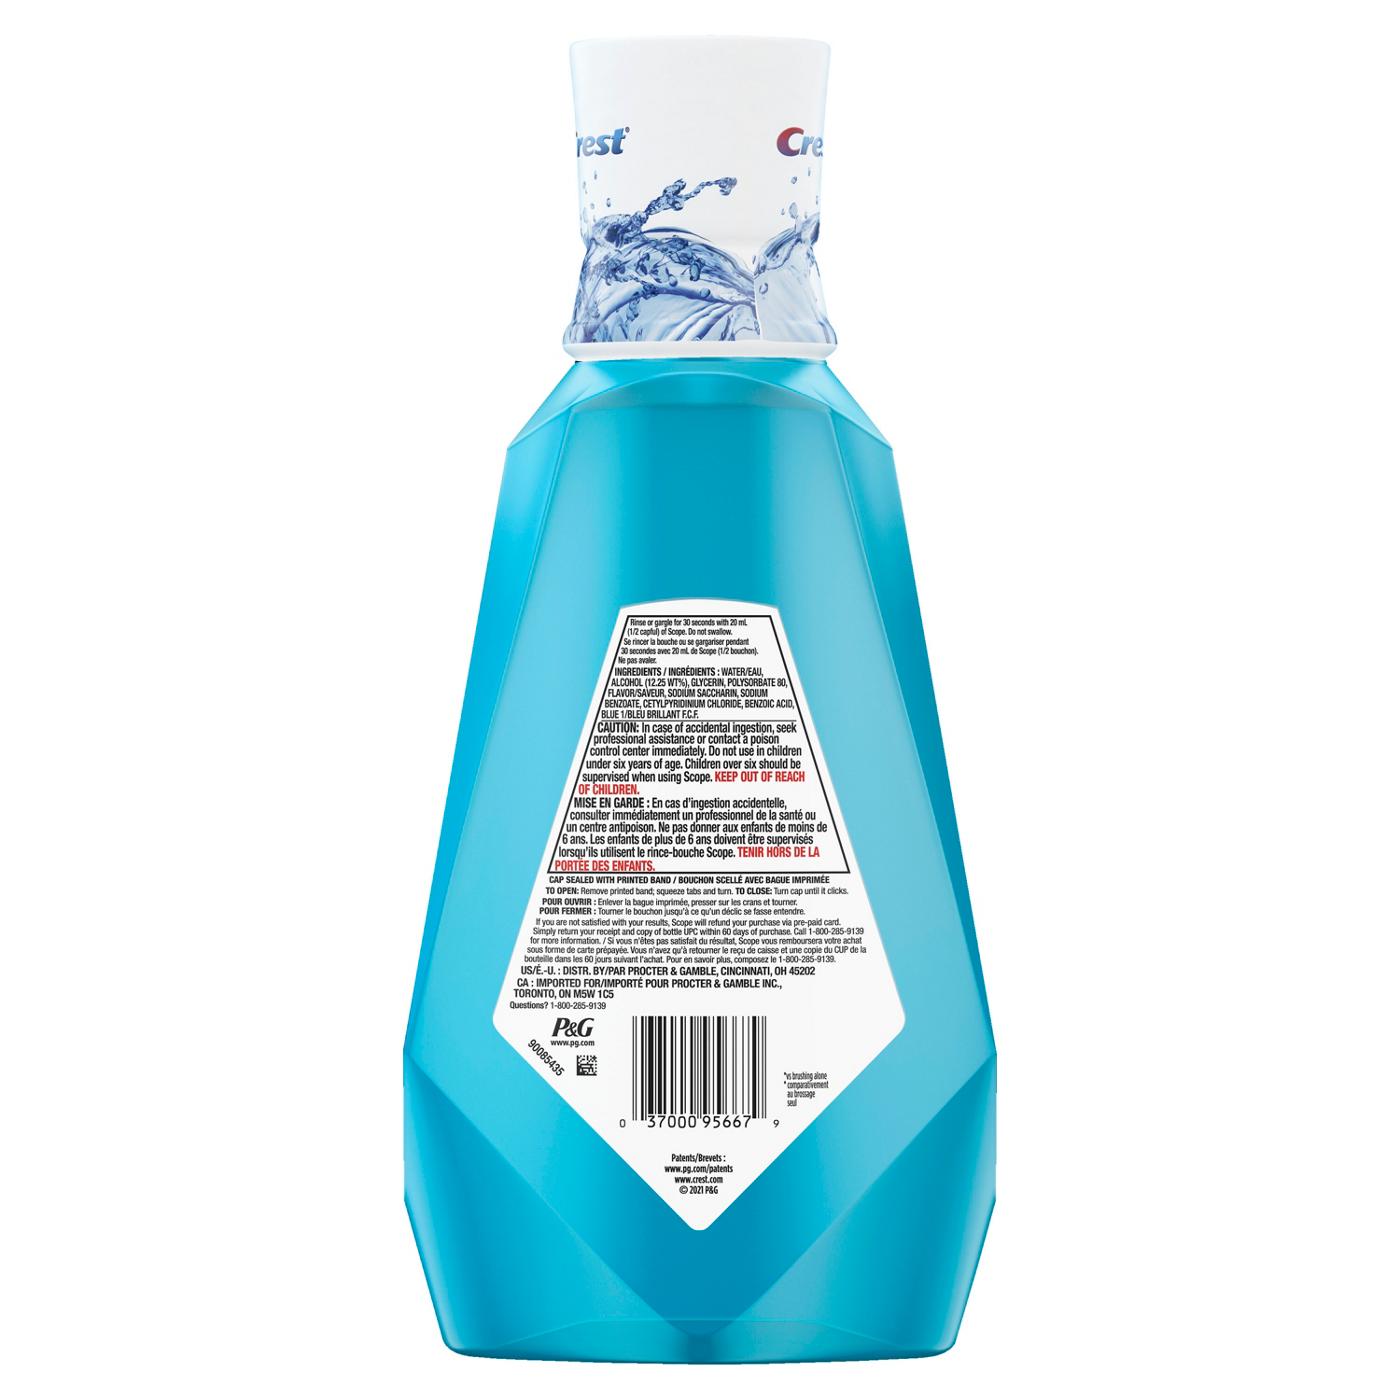 Crest Scope Outlast Mouthwash - Cool Peppermint; image 2 of 9